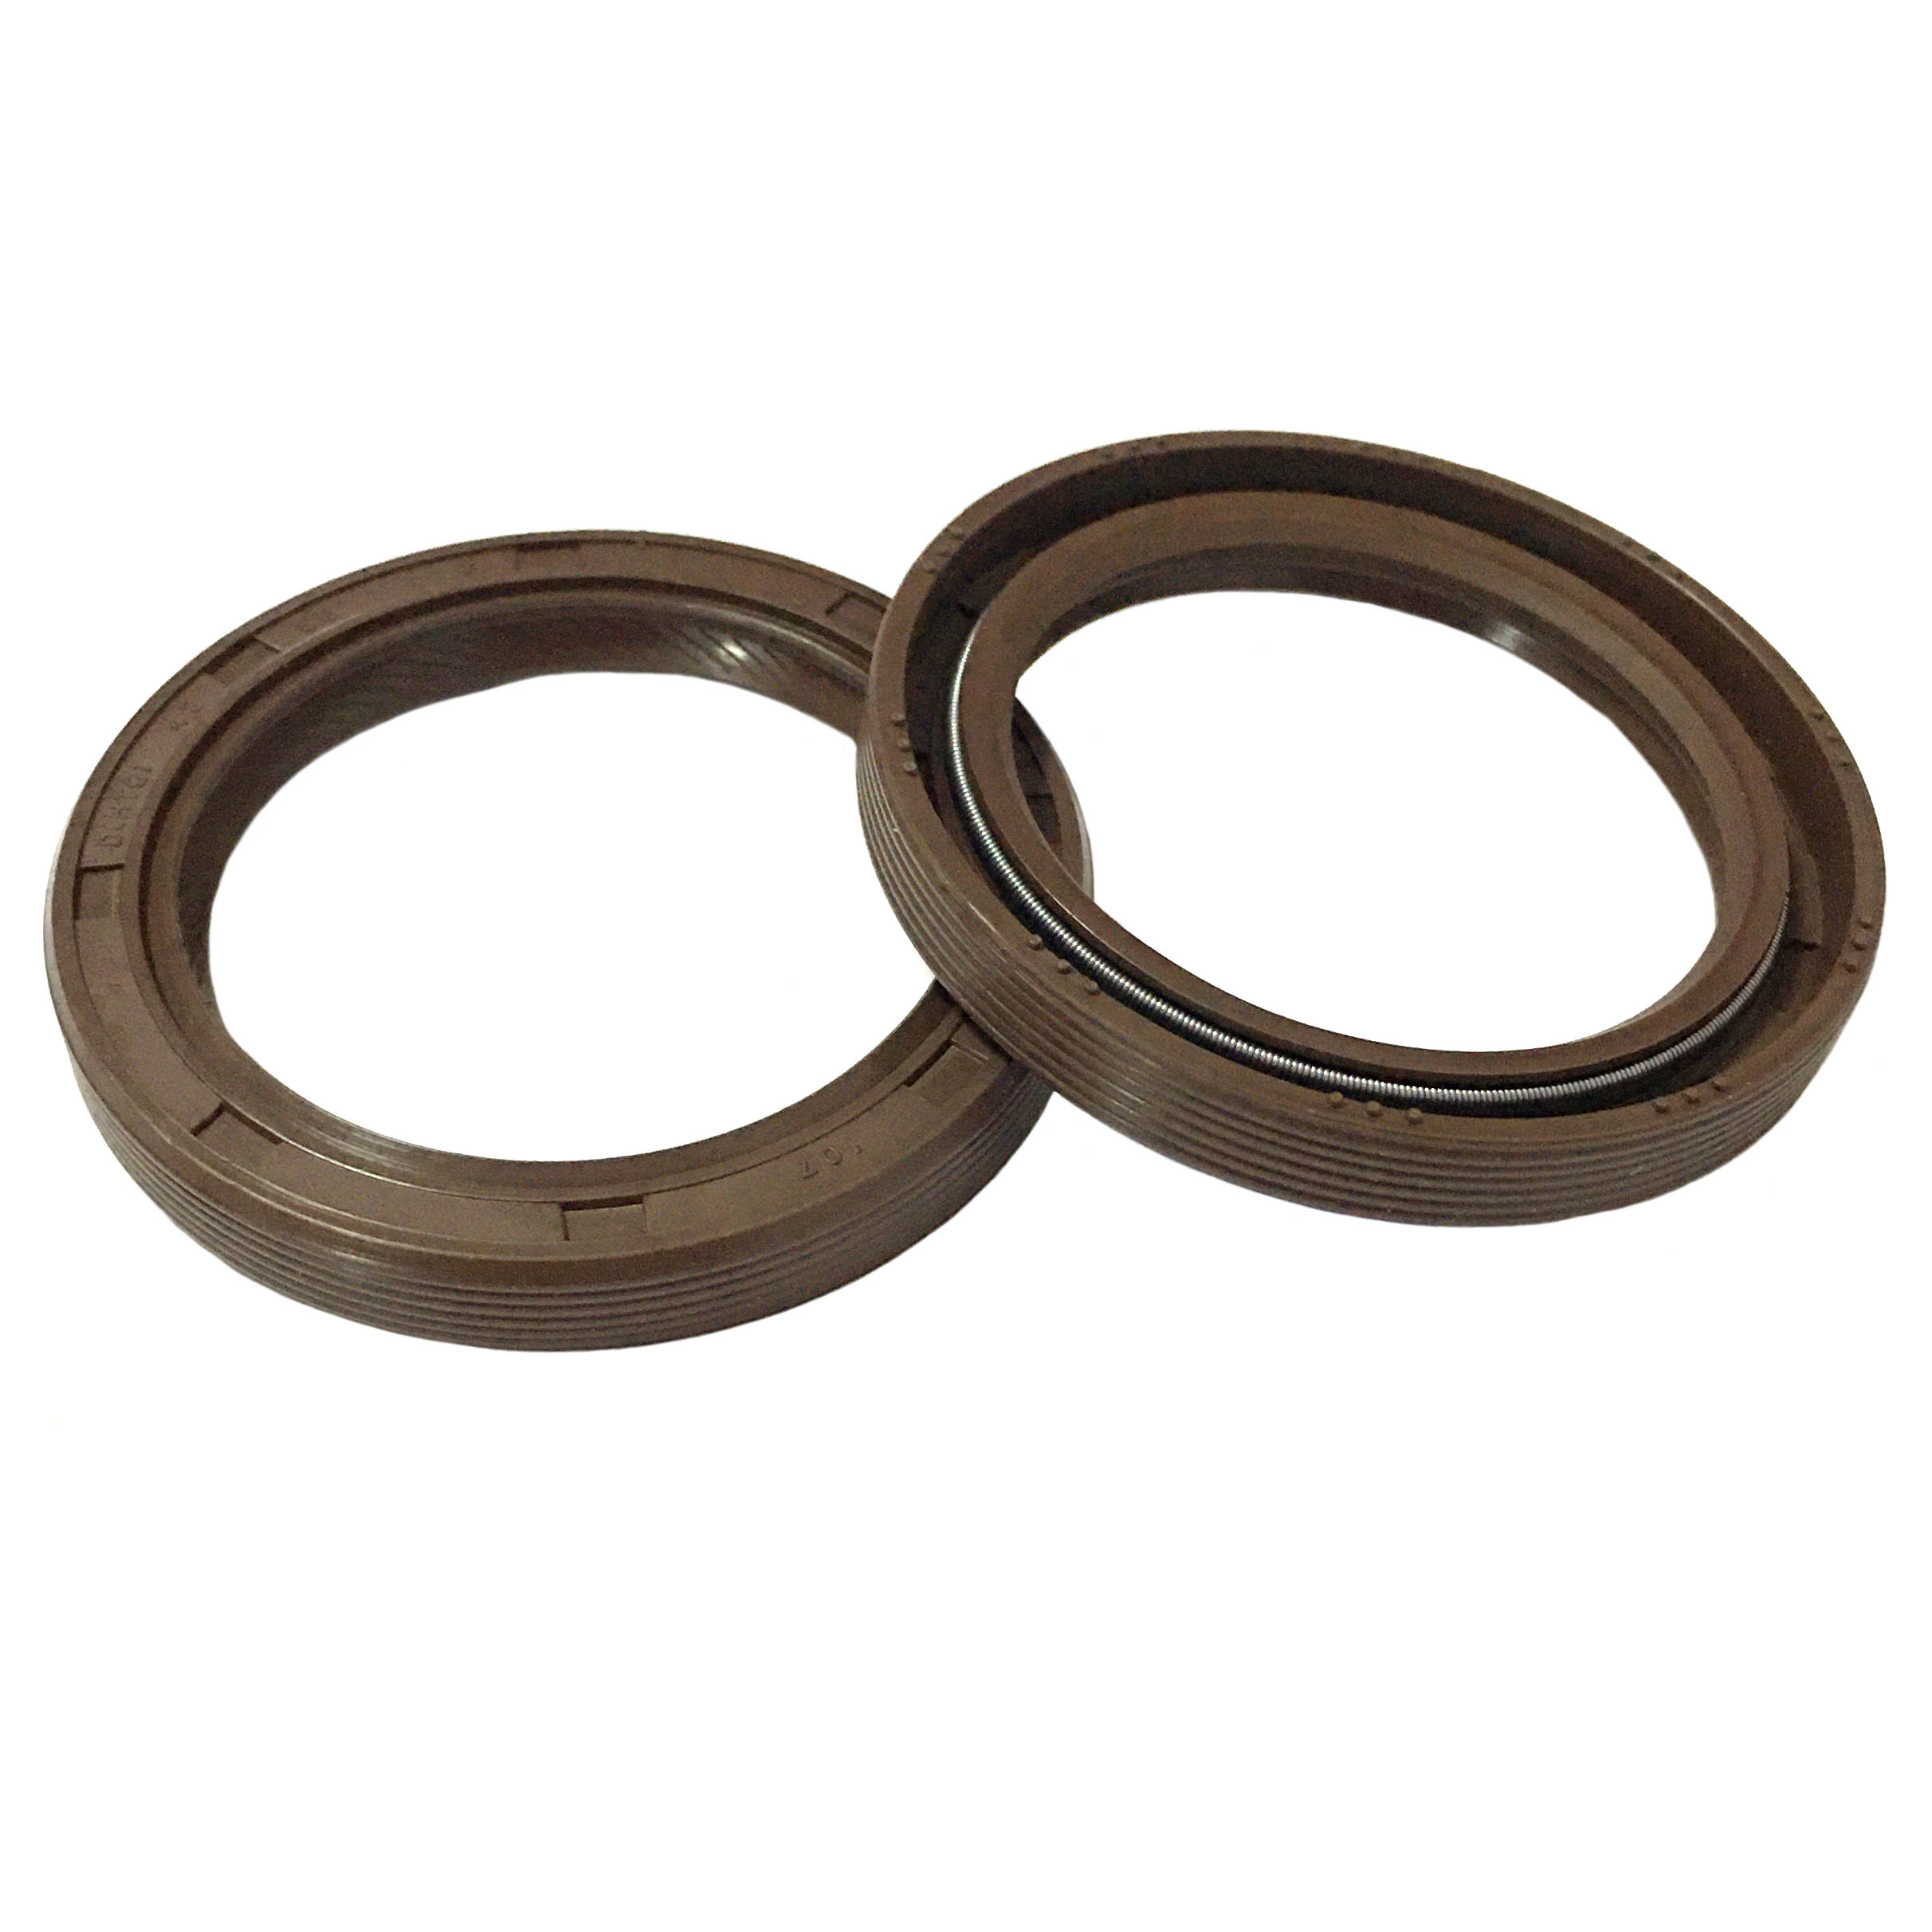 Size 42*56*7 HTC Seal Oil Seal 